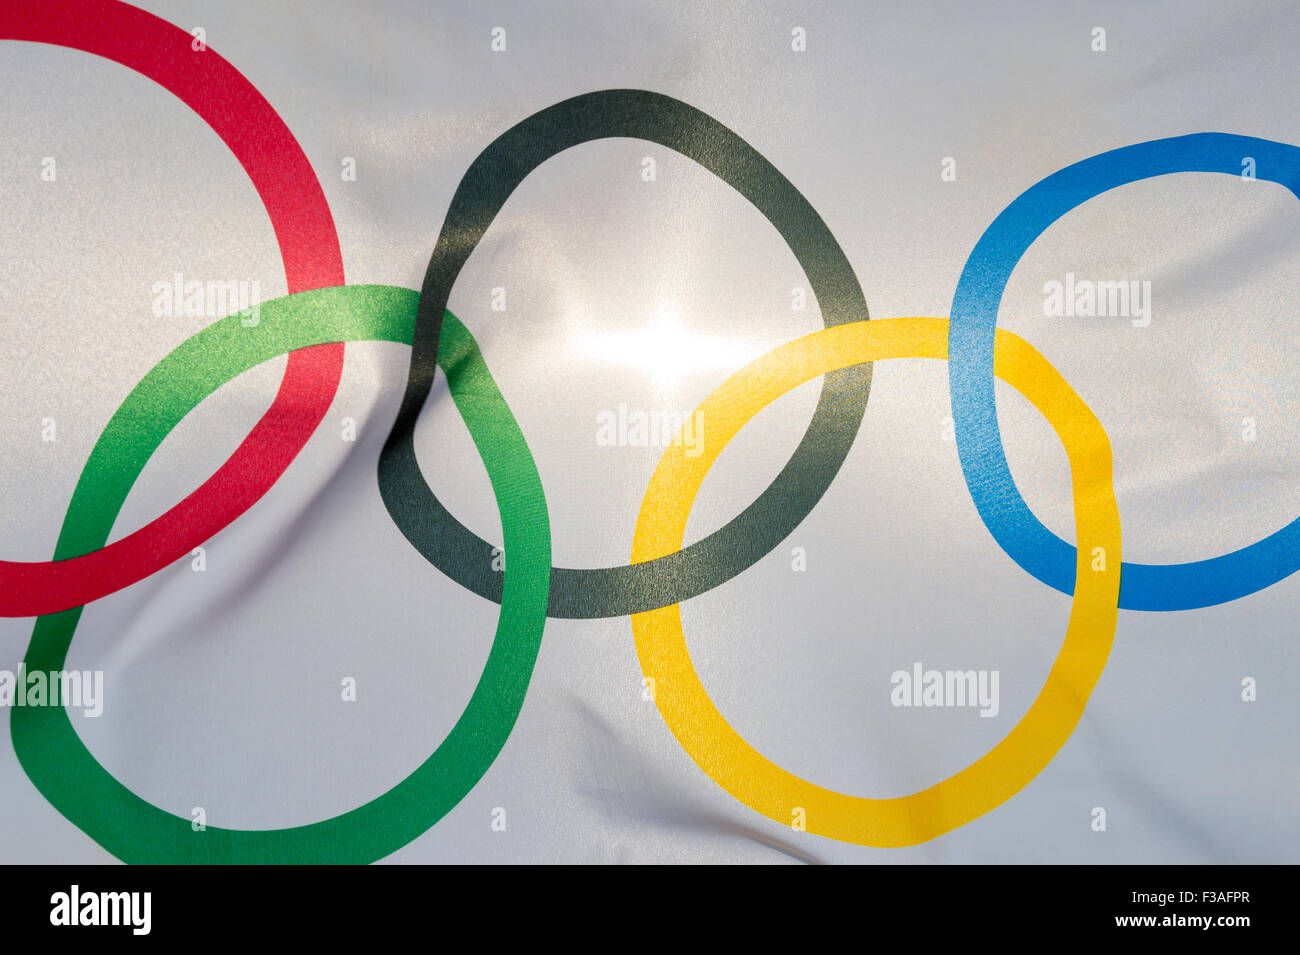 RIO DE JANEIRO, BRAZIL - FEBRUARY 12, 2015: An Olympic flag flutters in the wind backlit against bright sun. Stock Photo